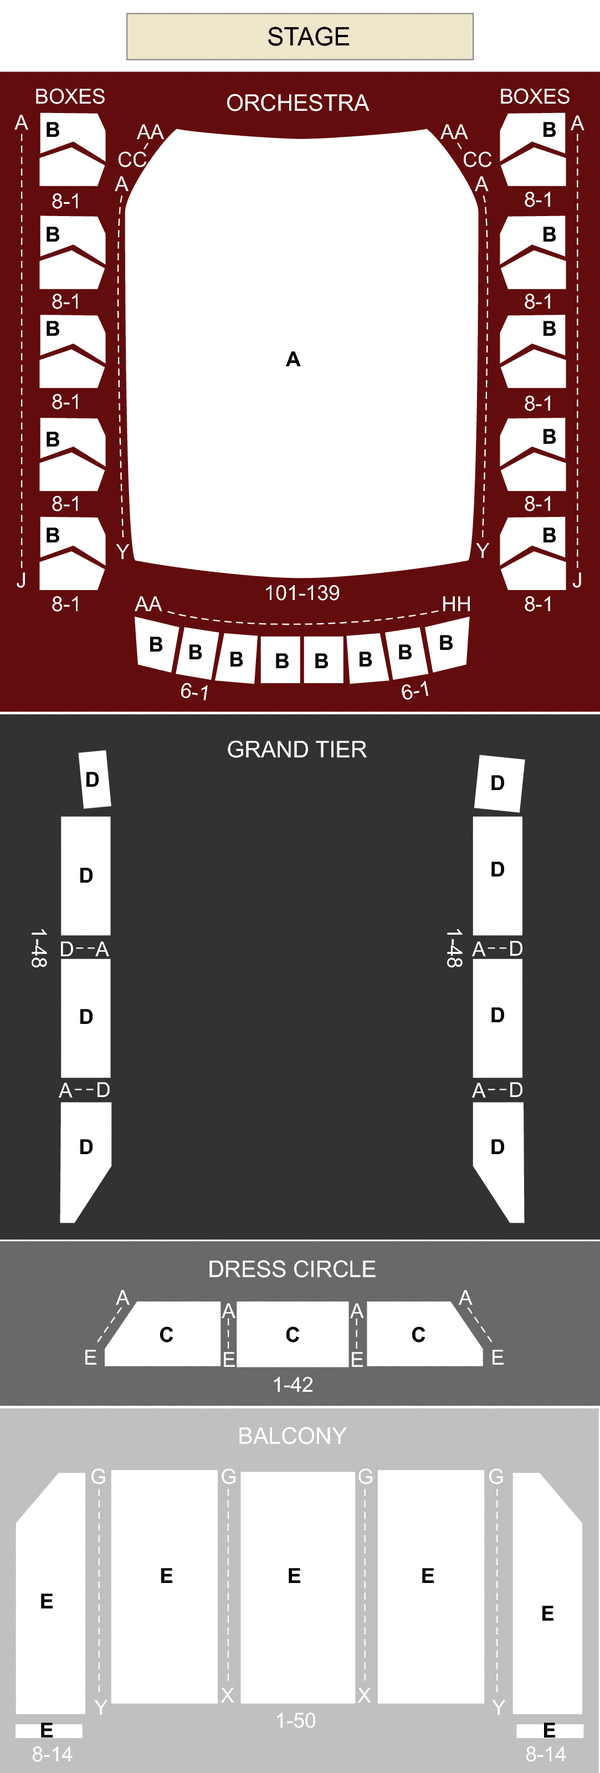 Modell Performing Arts Center at the Lyric Seating Chart